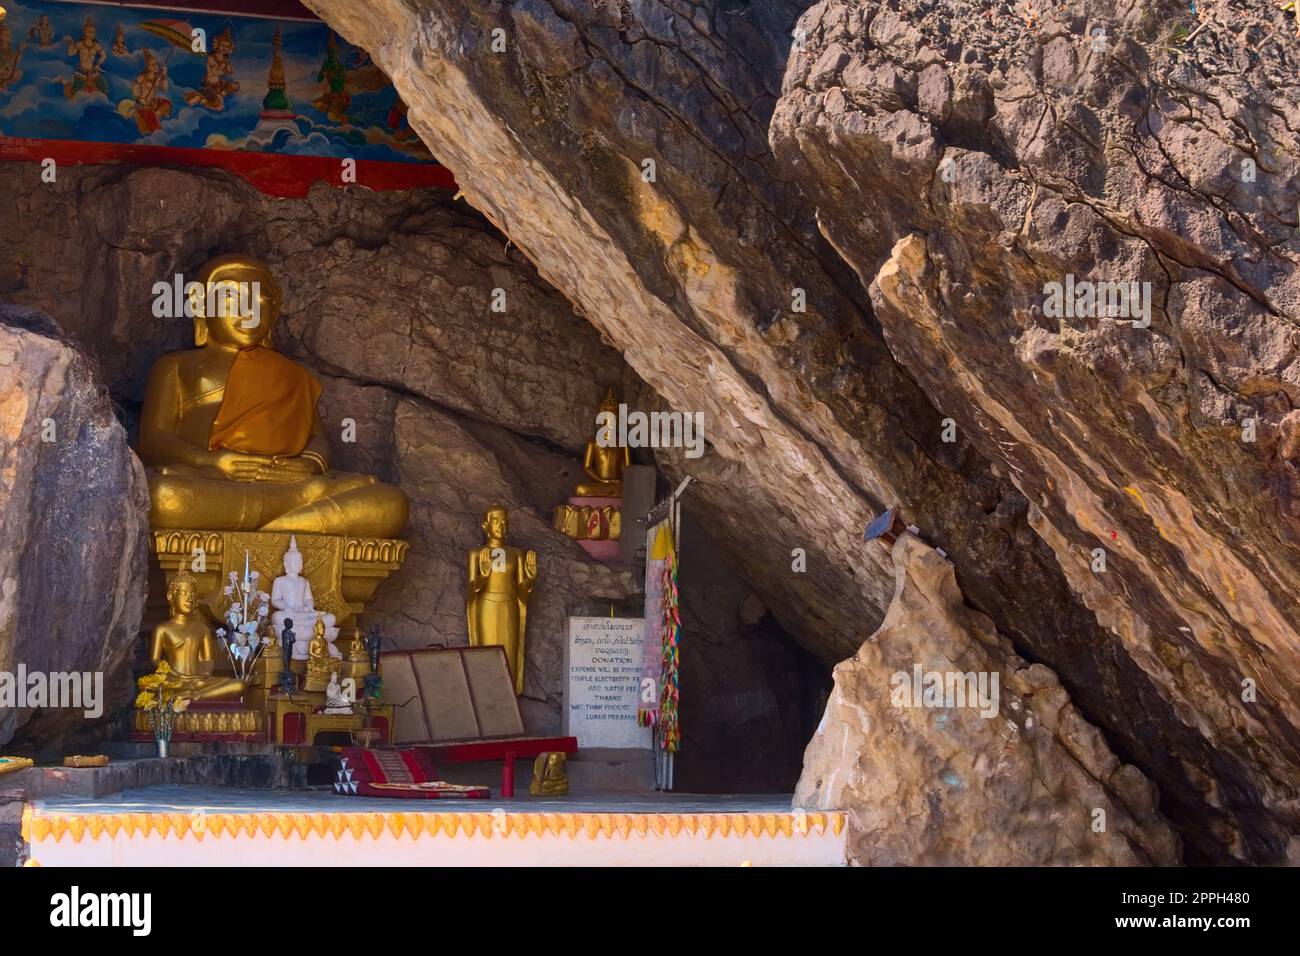 Golden statue of Buddha on a crevice of the rock at Mount Phou Si, in Luang Prabang, Laos. The entrance of the cave shrine can be seen on the right side. Stock Photo